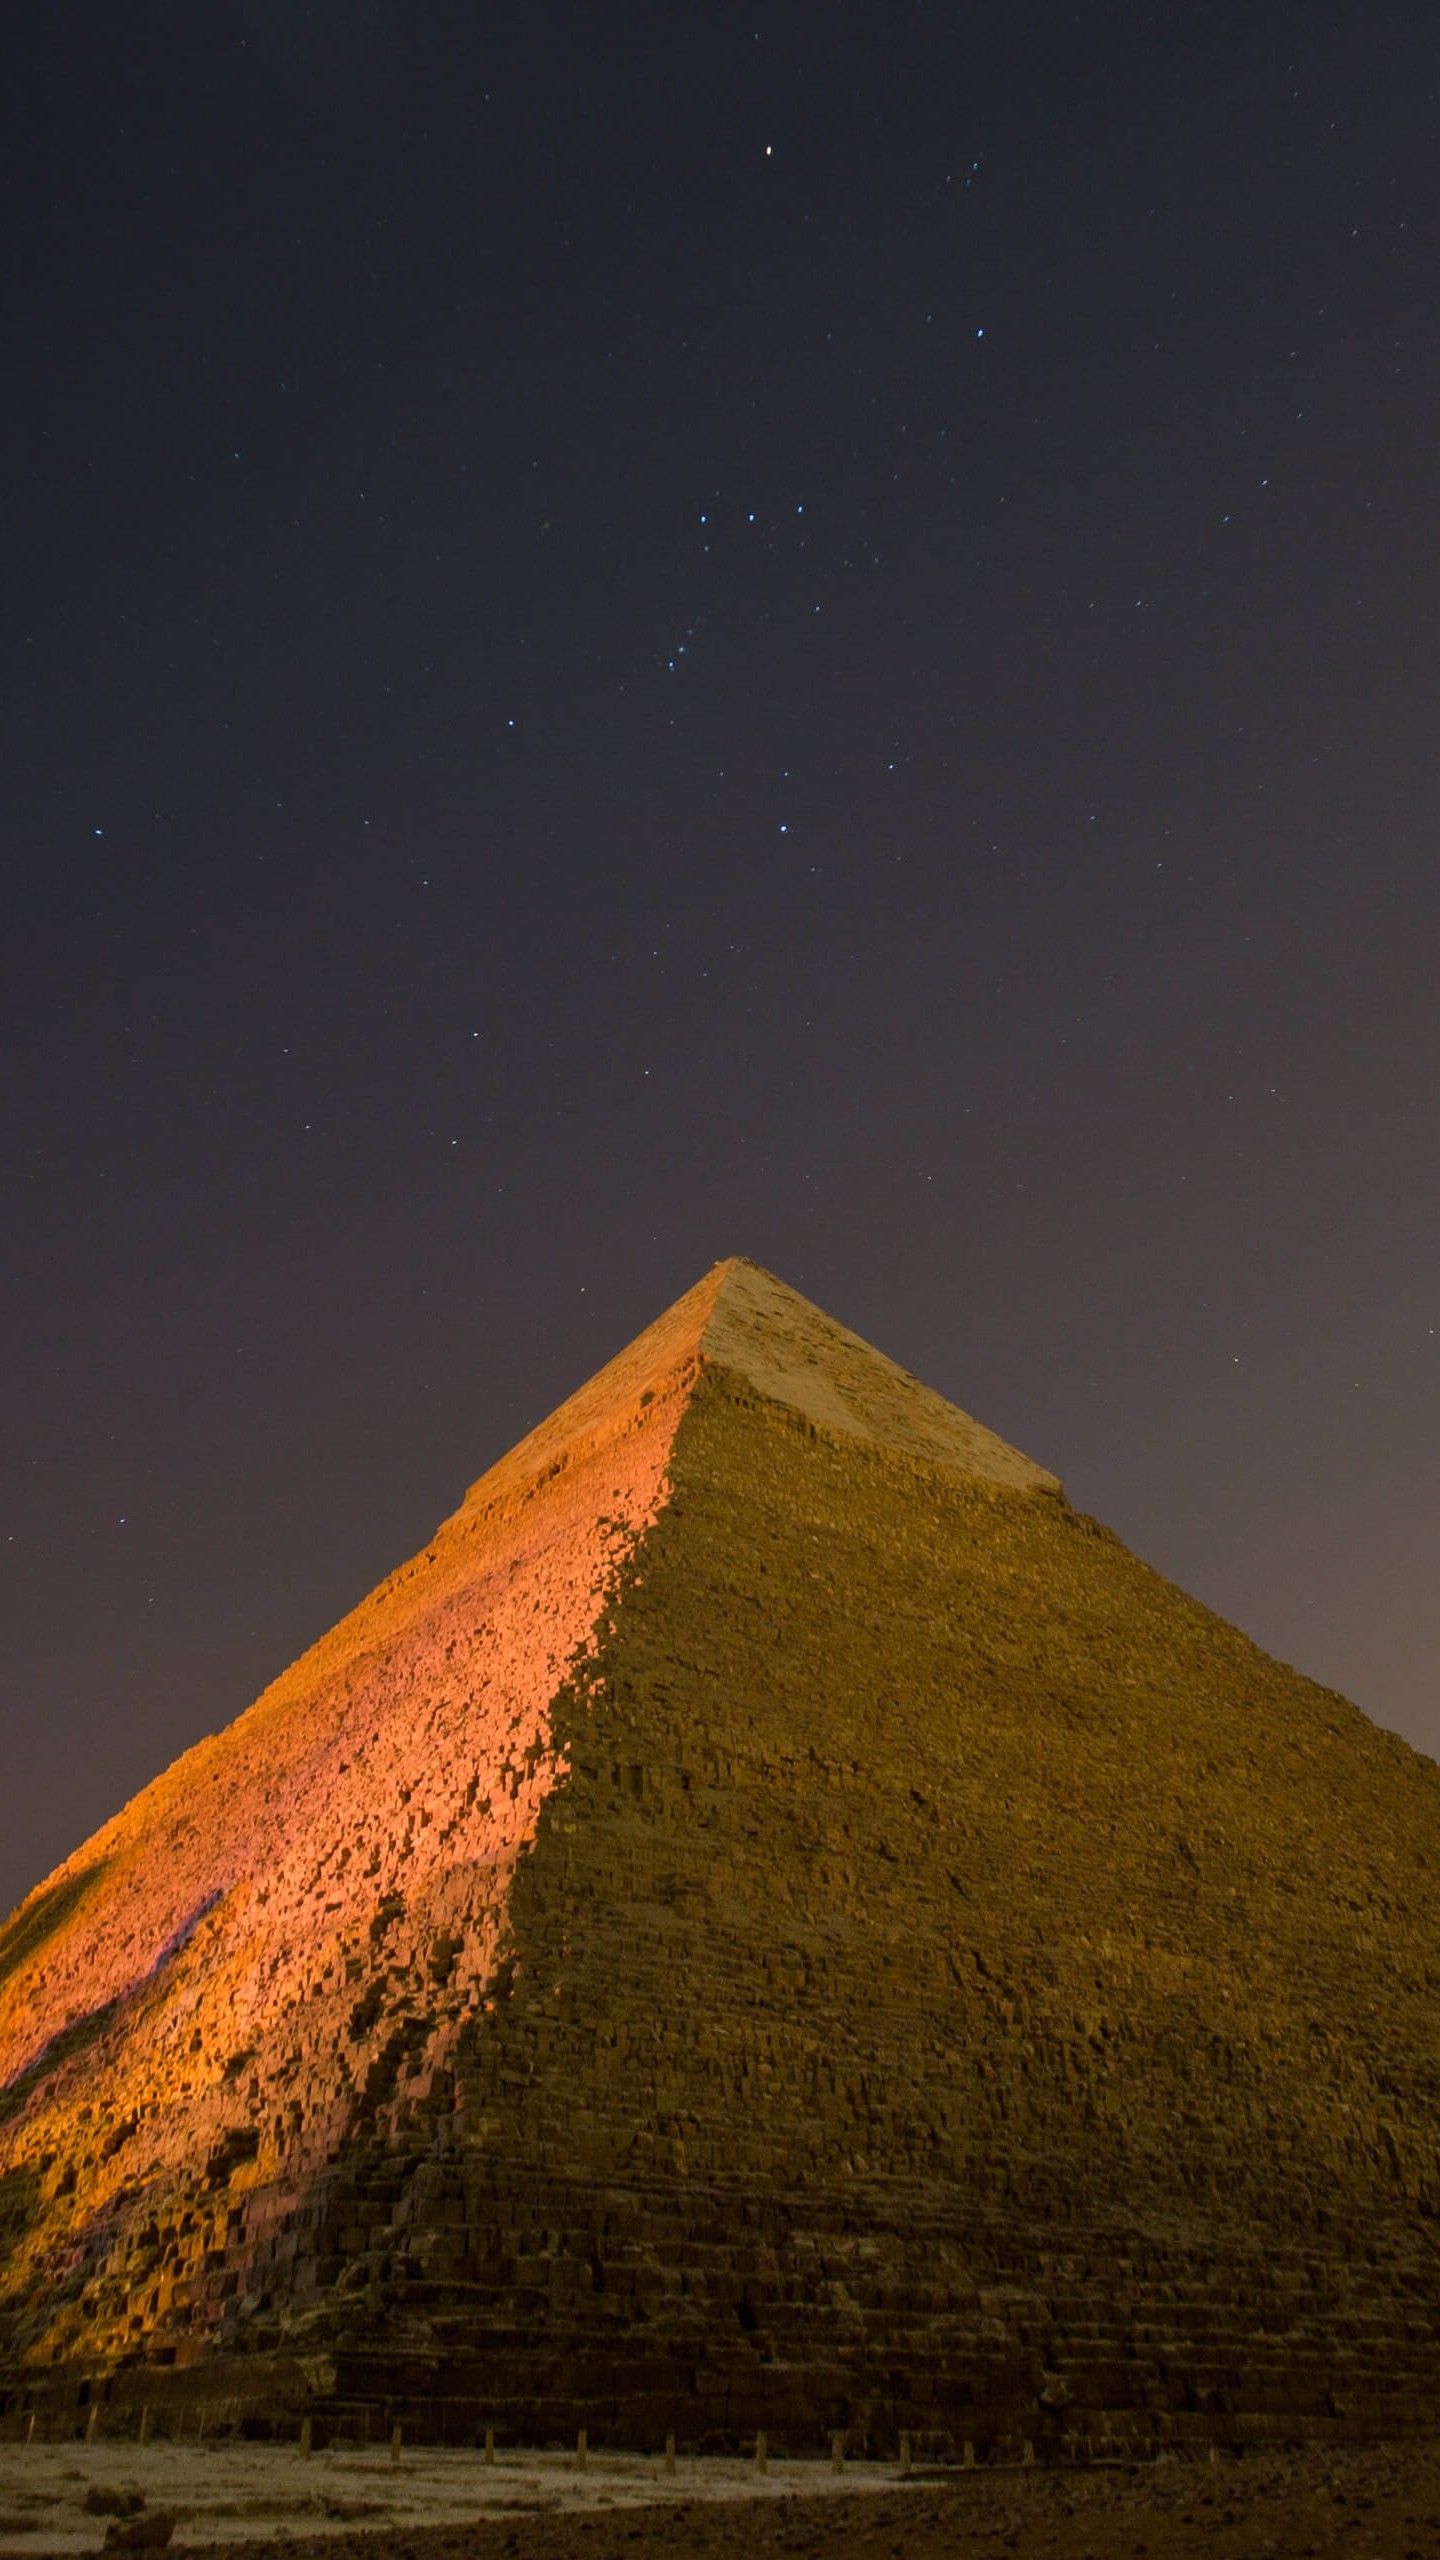 Pyramid by Night Wallpaper for SAMSUNG Galaxy Note 4